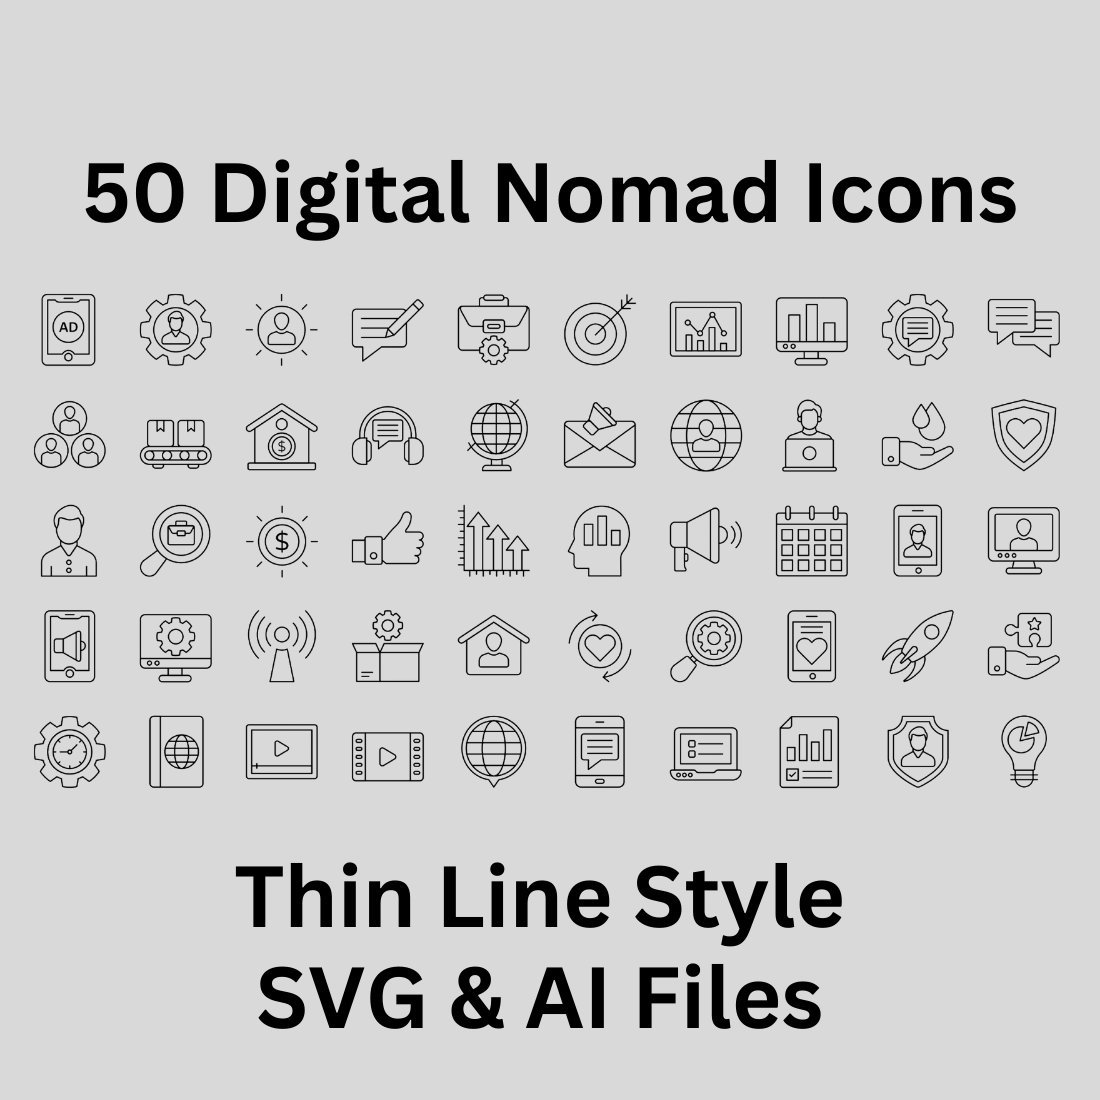 Digital Nomad Icon Set 50 Outline Icons - SVG And AI Files preview image.